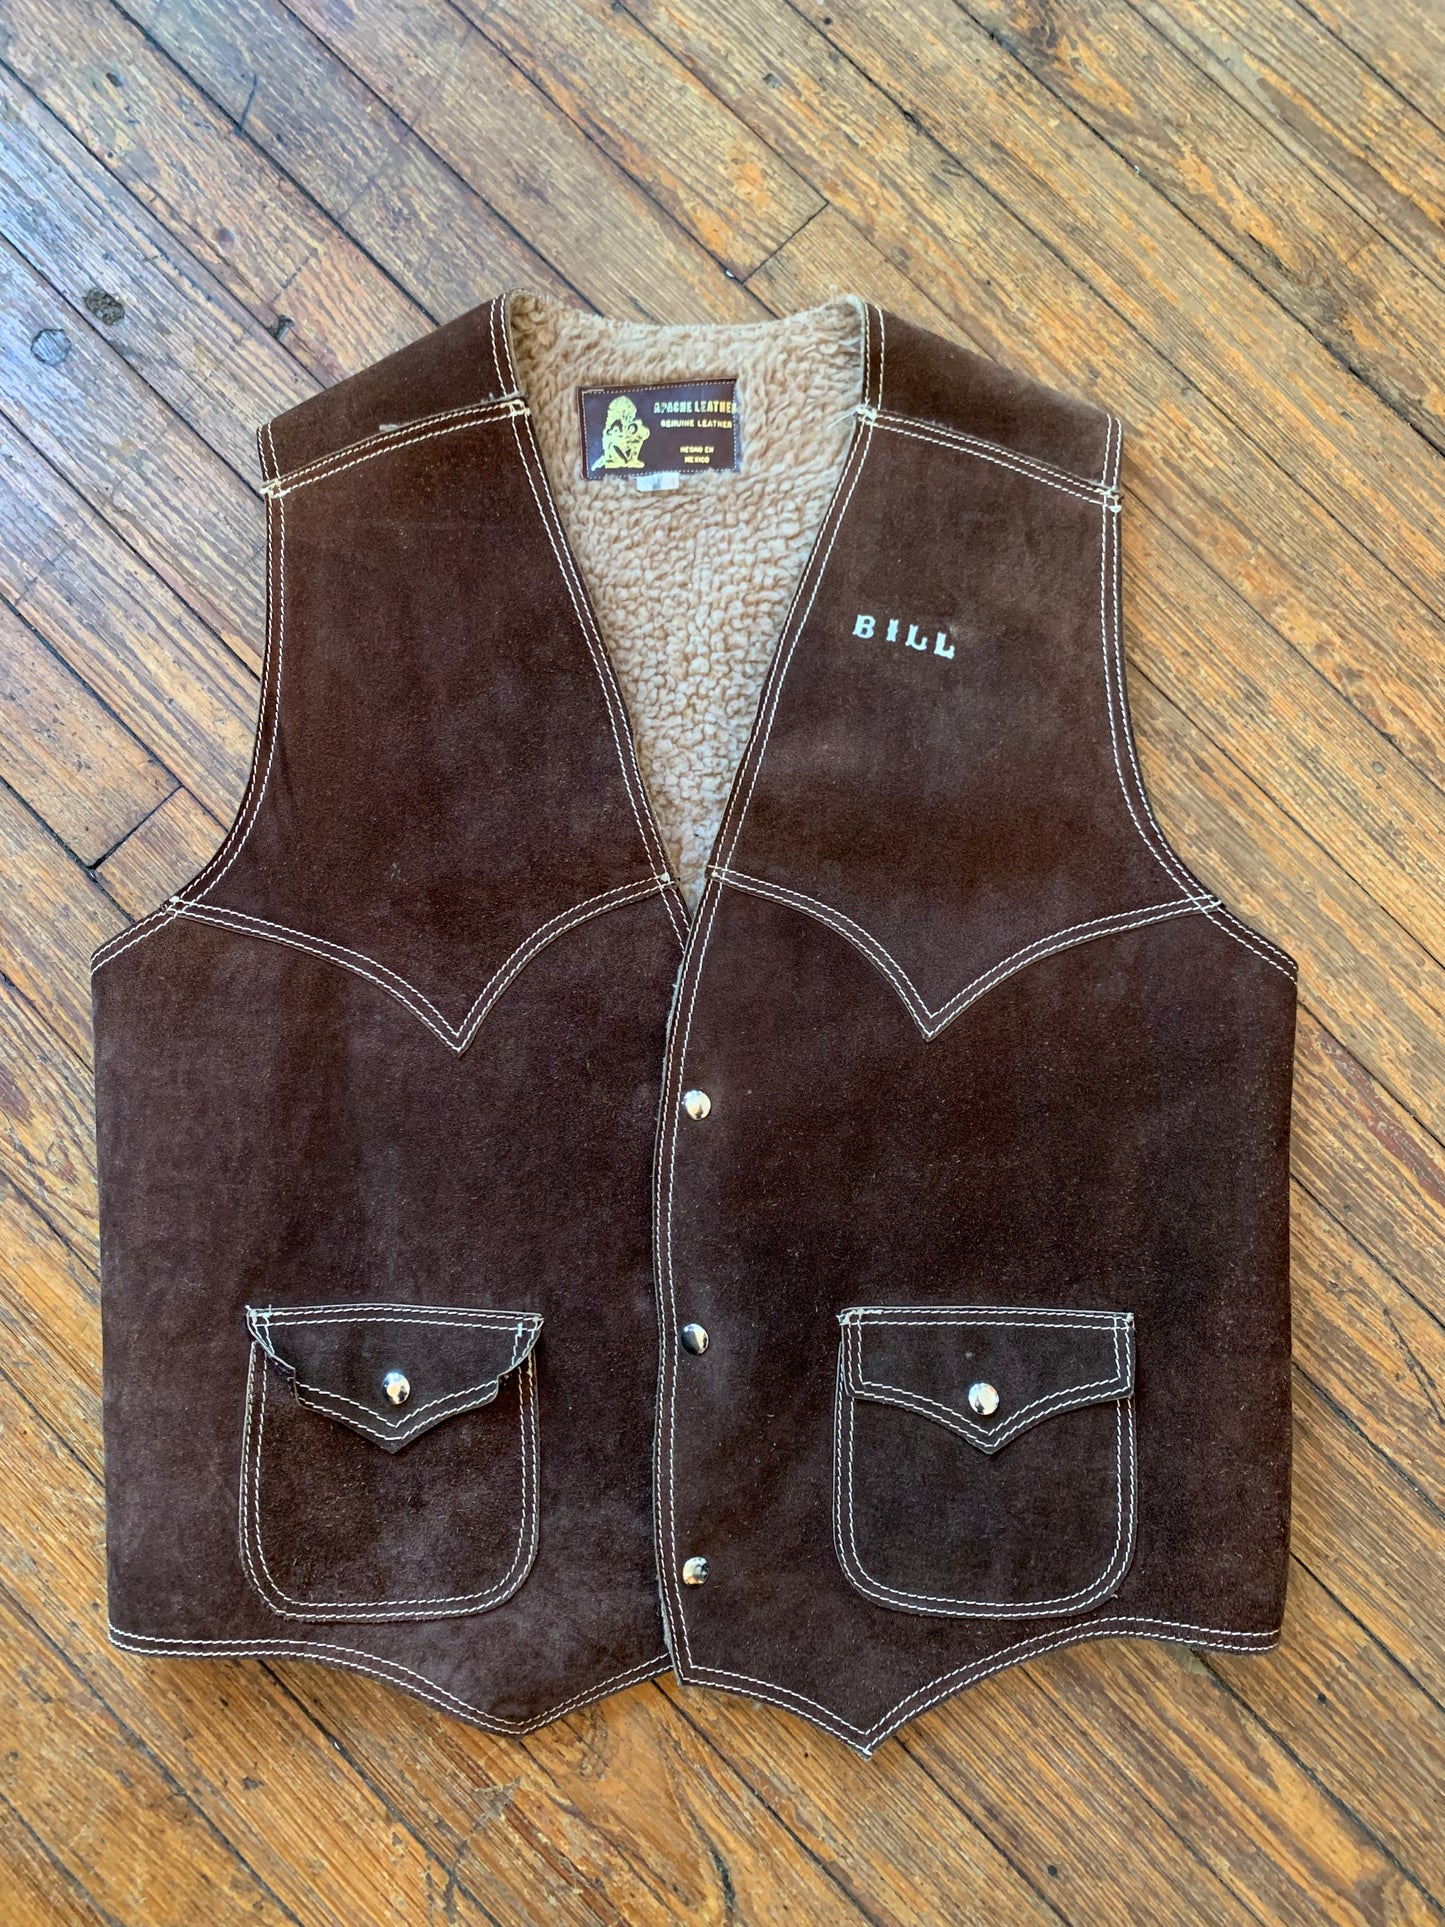 Vintage “Bill” Apache Leather Brown Suede and Shearling Vest